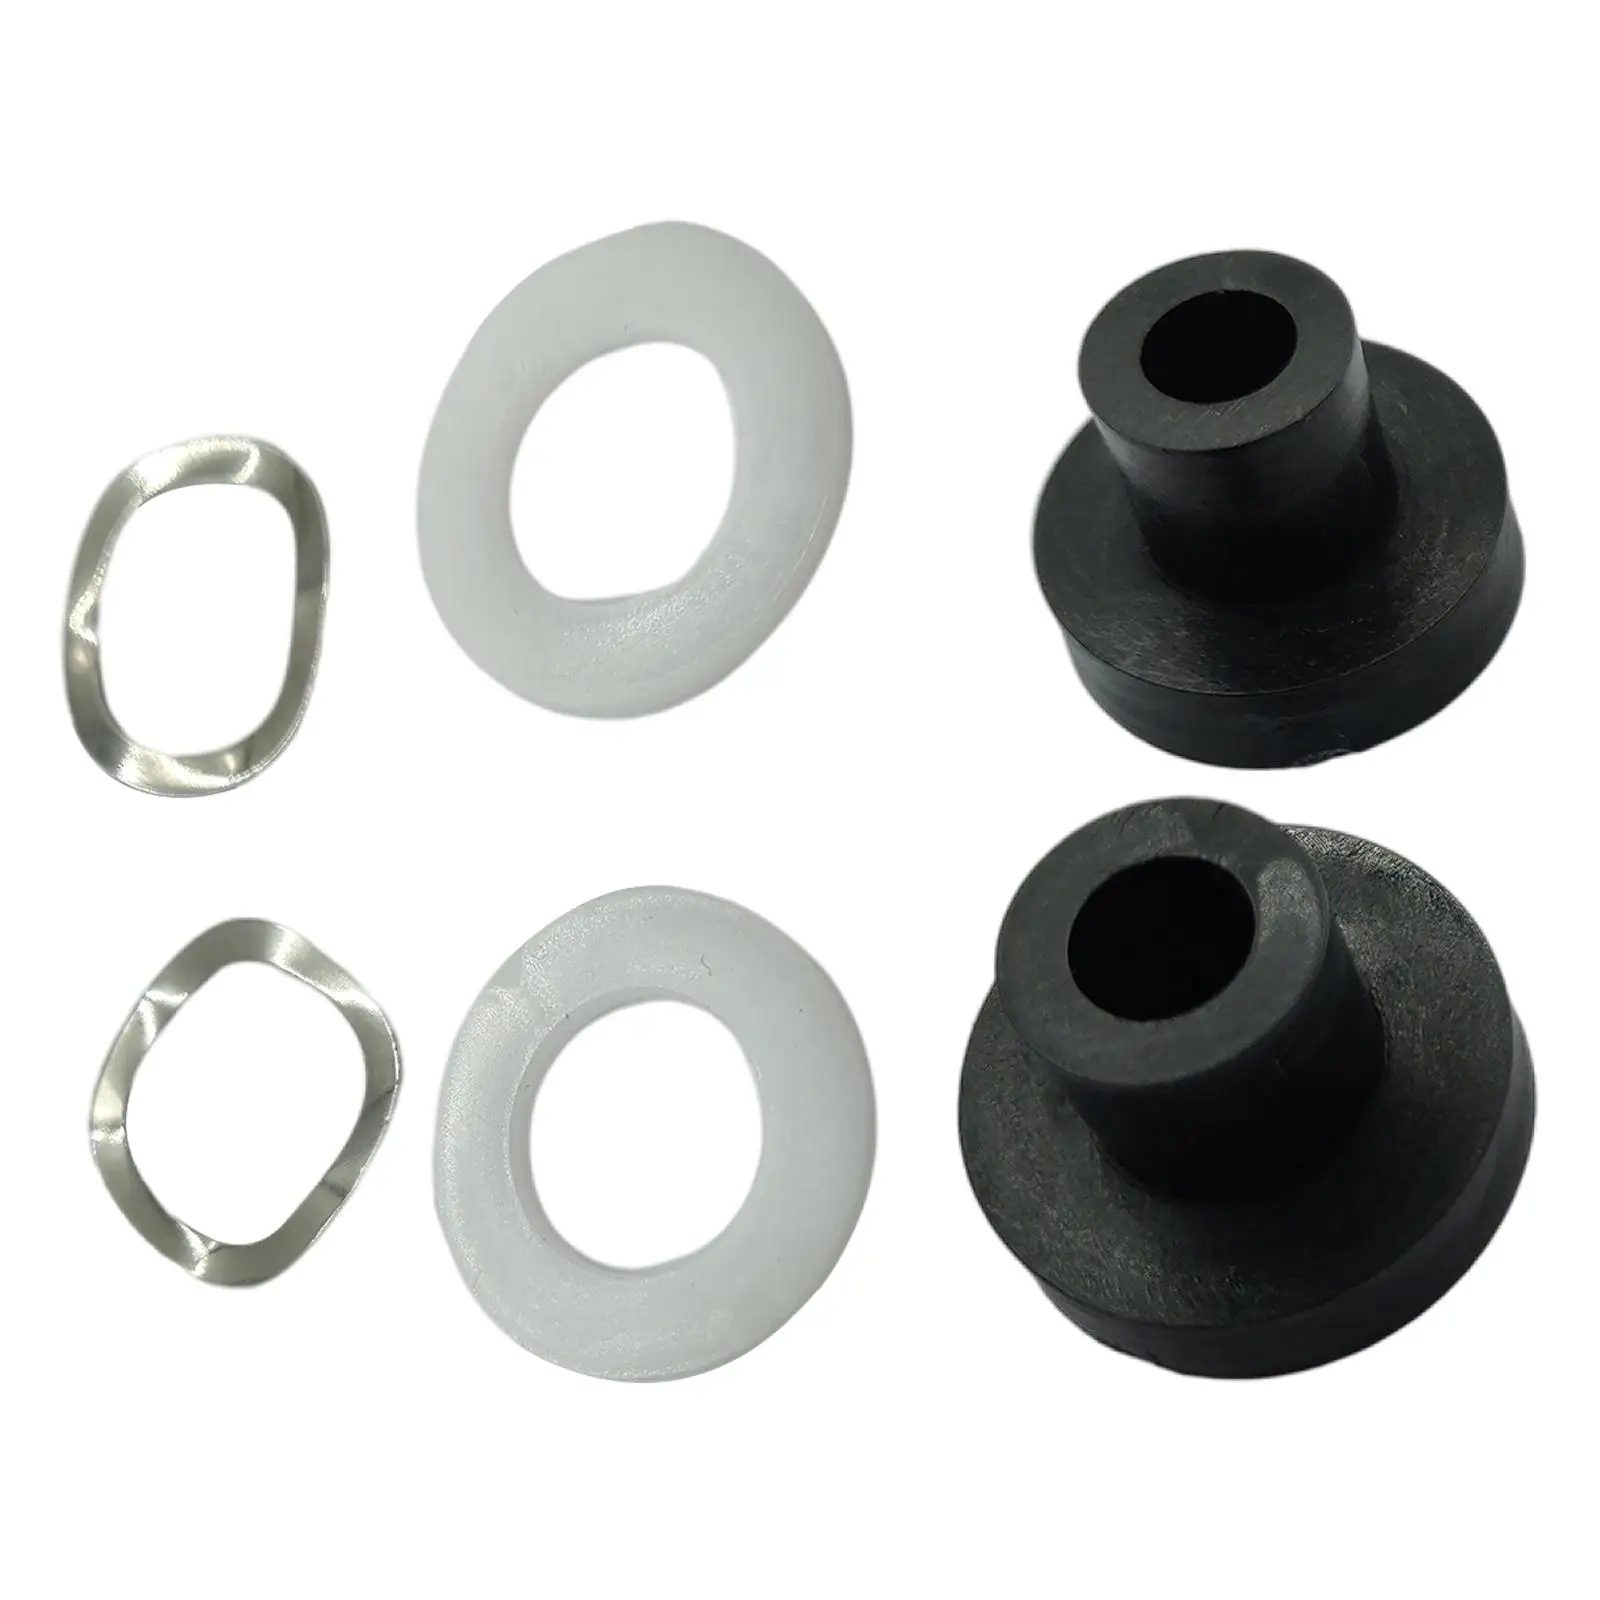 2Pcs Car Window Bushings 909-925 Direct Replaces Premium High Performance Easy to Install Accessories Fits for Mazda Miata 90-05